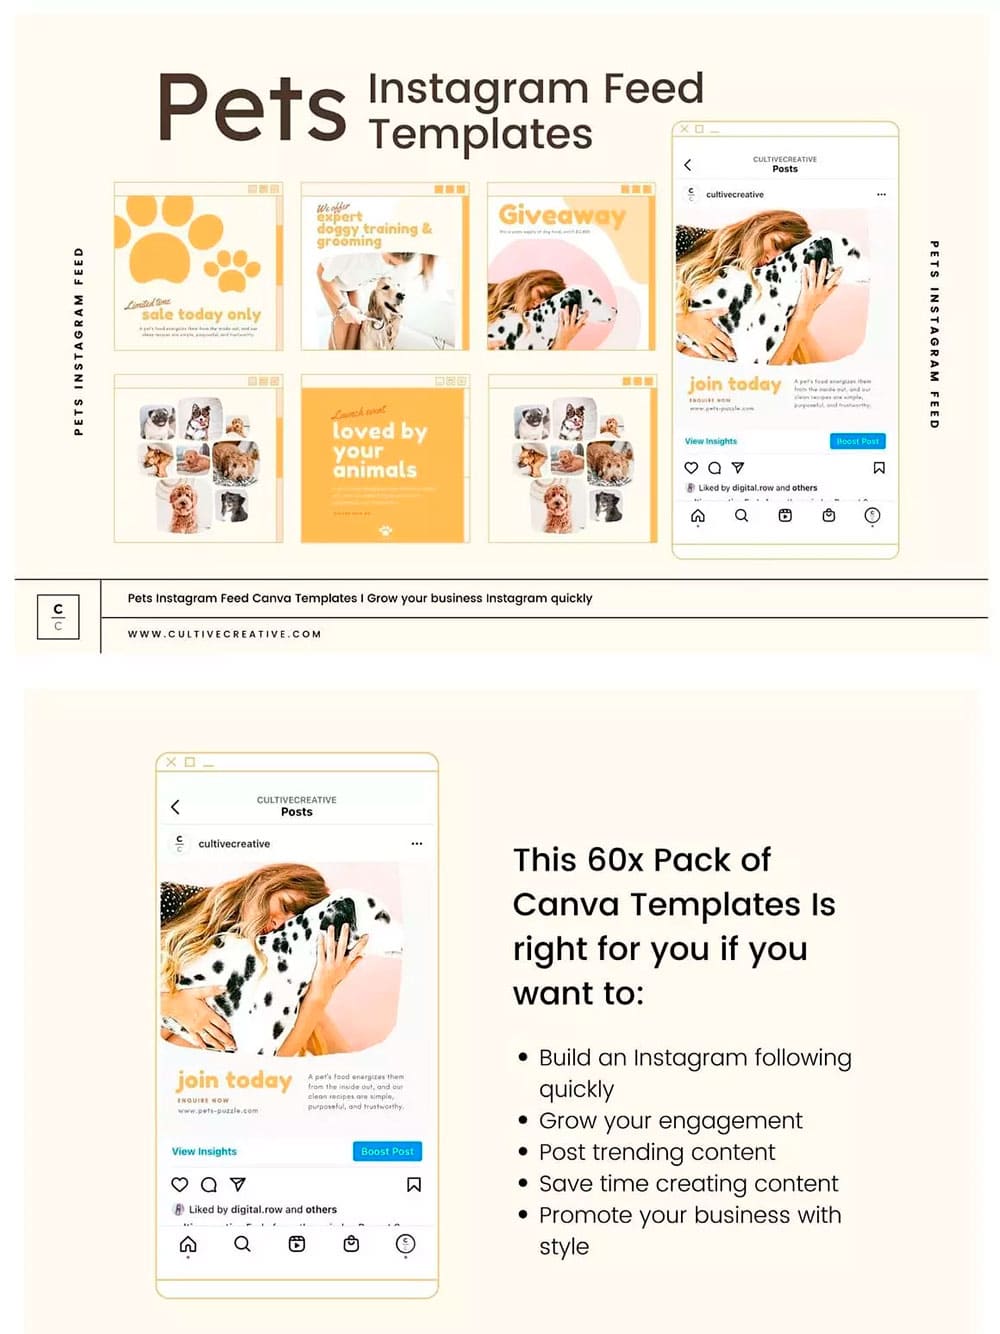 Pets instagram feed canva templates, for pinterest.